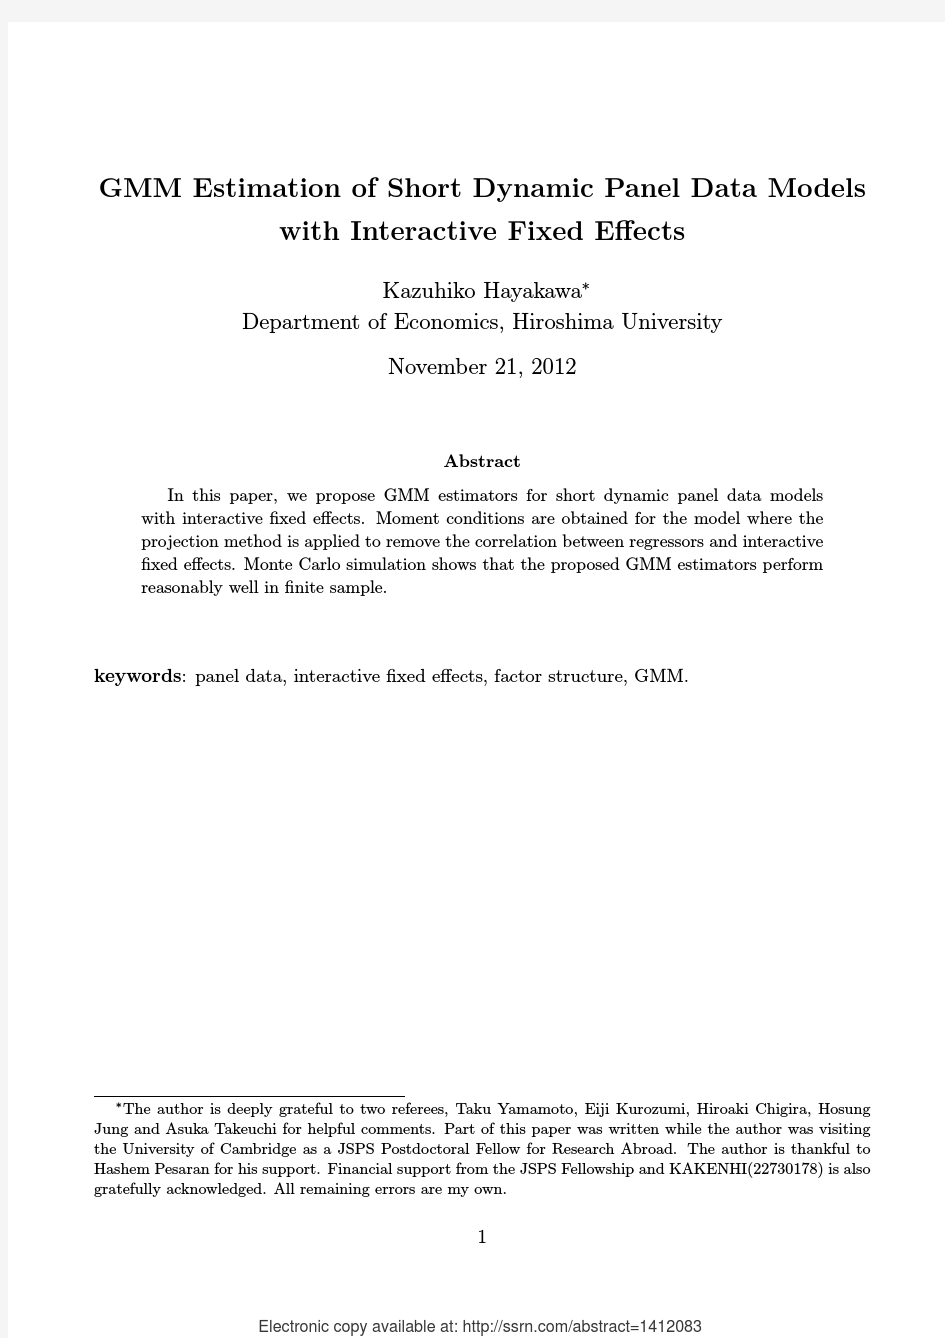 GMM Estimation of Short Dynamic Panel Data Models with Interactive Fixed Effects—Hayakawa